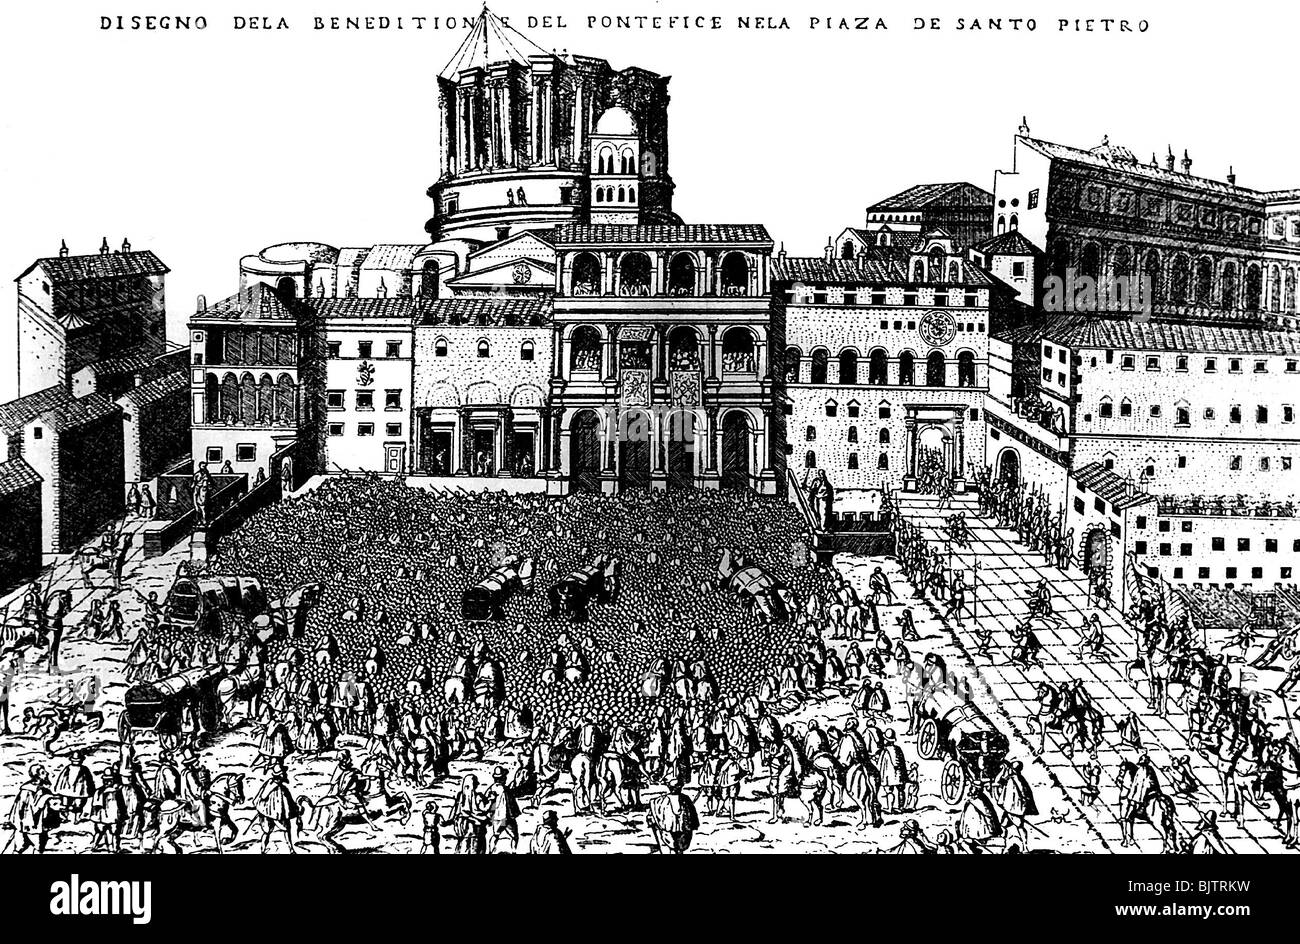 geography / travel, Italy, Rome, St. Peter's Basilica, in times of Pope Sixtus V (1585 - 1590) under construction, pope bless people, contemporary woodcut, 16th century, historic, historical, St. Peter's Basilica, Papal Basilica of Saint Peter, Basilica Papale di San Pietro, 5th, religion, Christianity, crowds, crowd, ritual, custom, Vatican, Southern Europe, people, Stock Photo